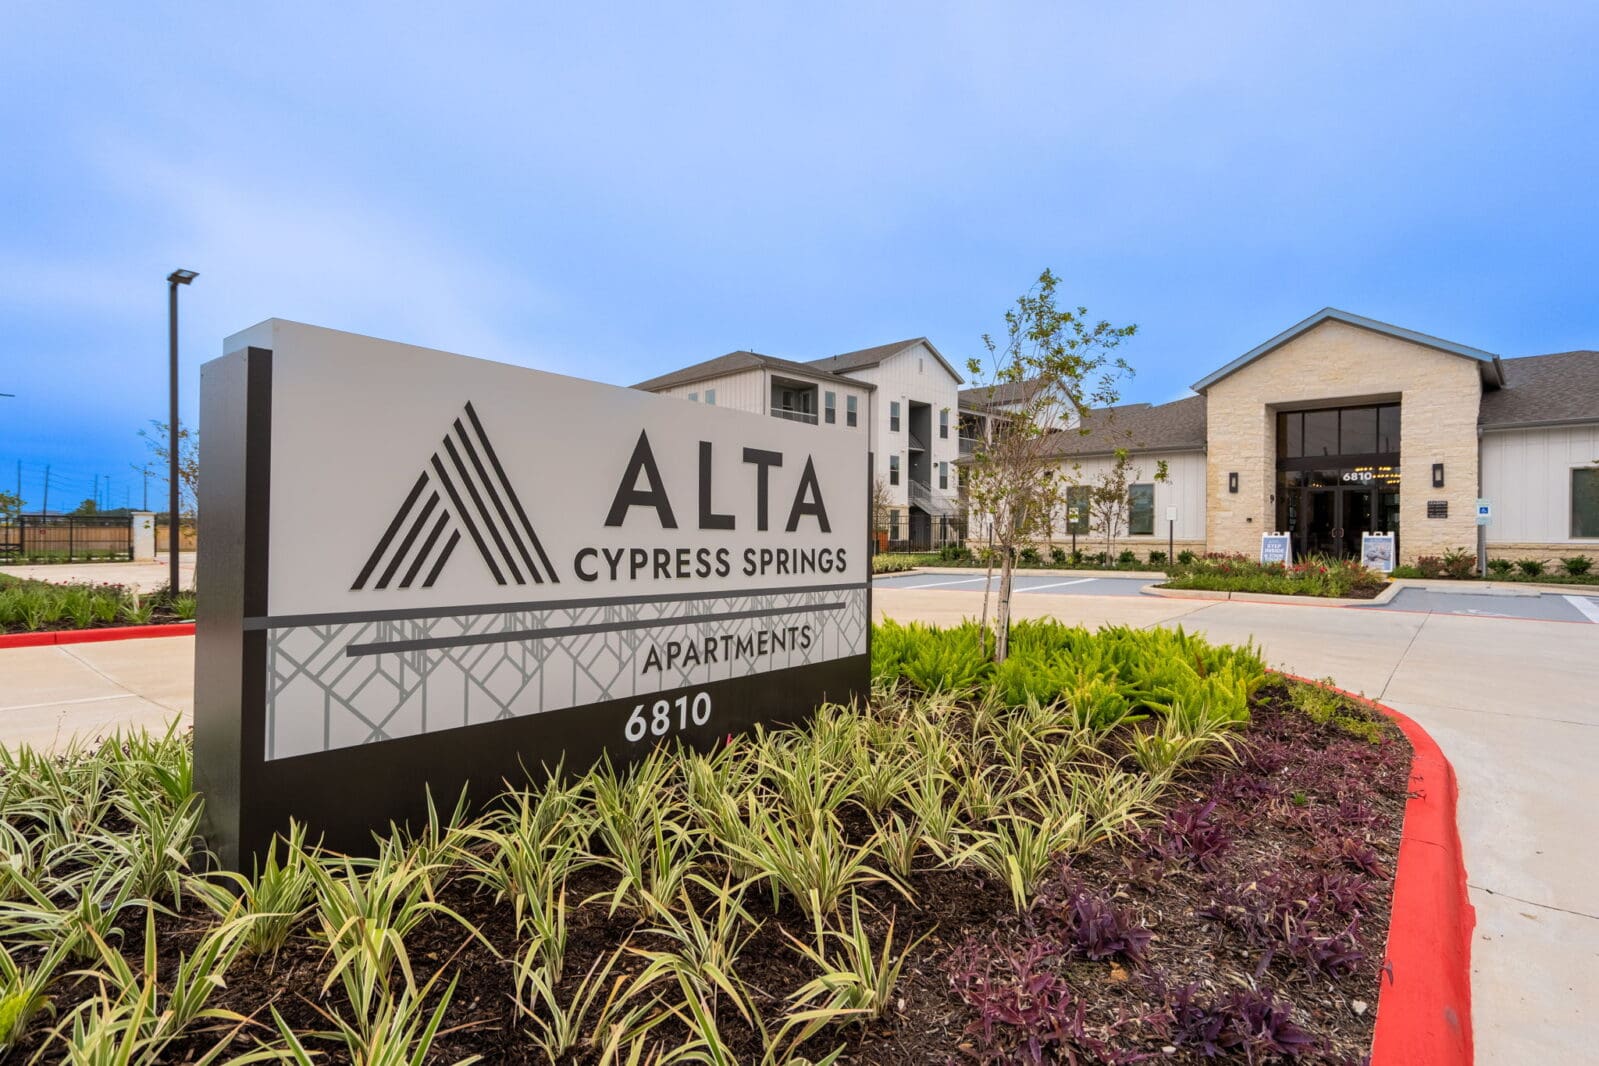 Wood Partners Expands Houston Footprint with Grand Opening of 330-Unit Alta Cypress Springs Upscale Apartment Community in Katy